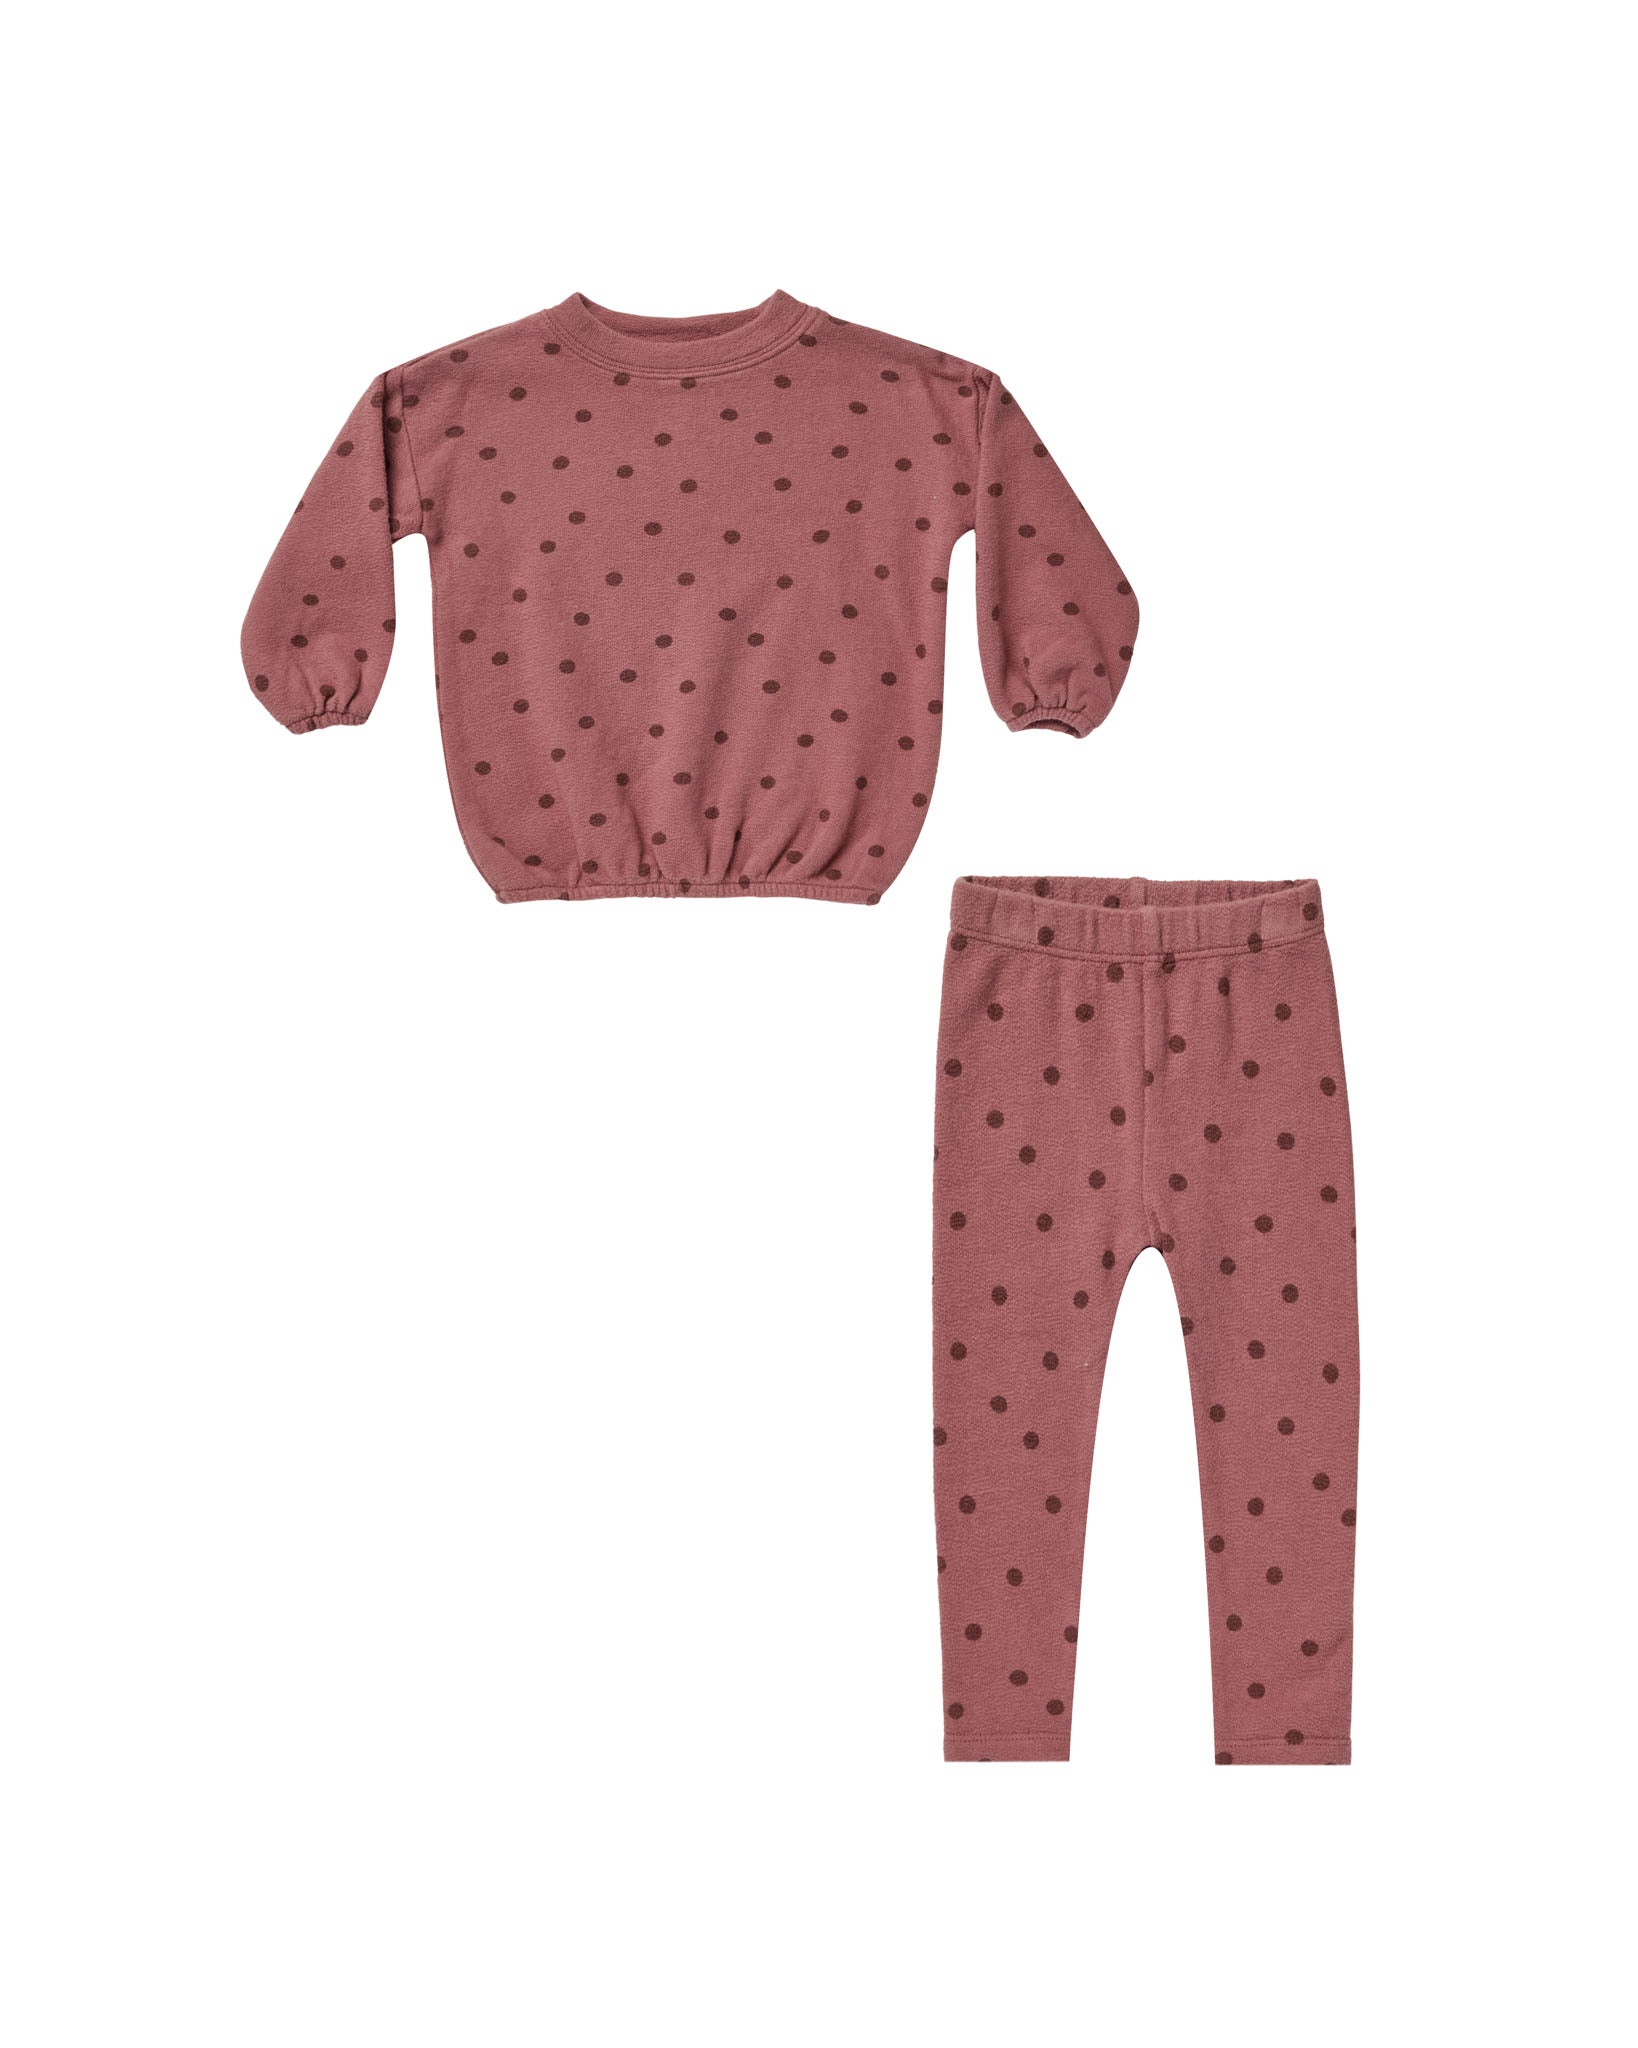 Rylee + Cru Cinched Ribbed Legging: Black - Lagoon Baby + Toy Shoppe -  Rylee + Cru Canada - Comfy Toddler Clothes Maple Ridge